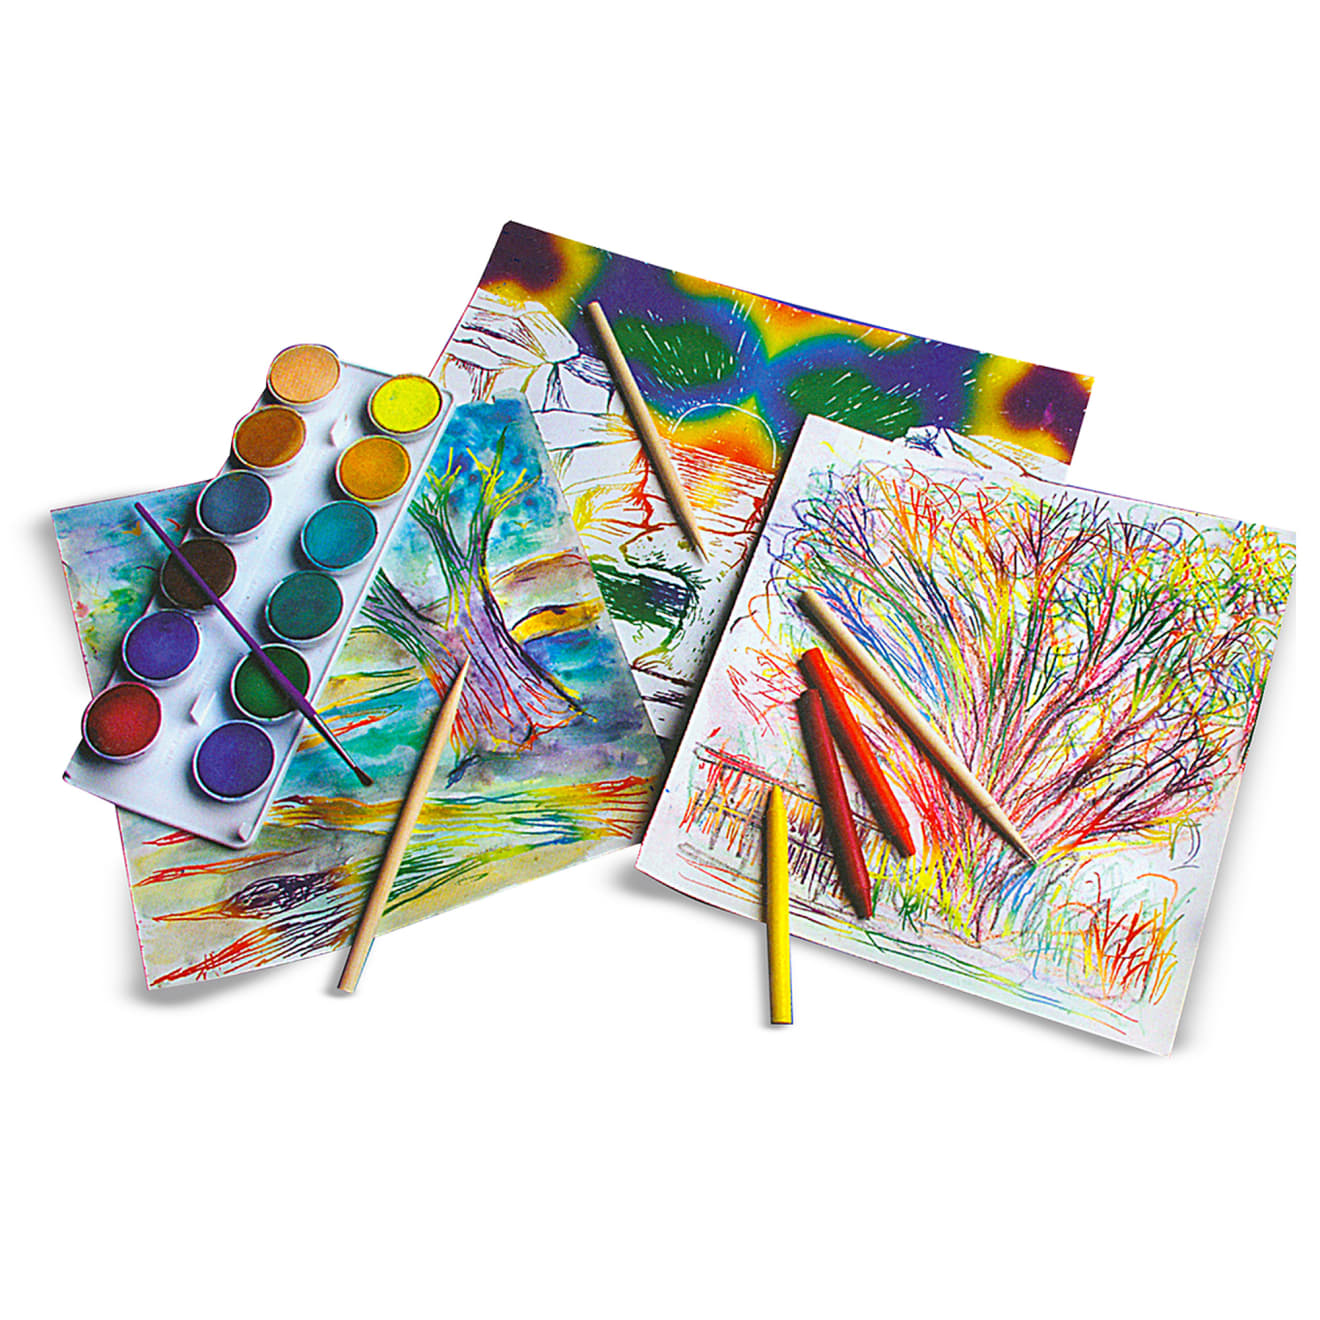 Rainbow Scratch Paper Art Set, 50 LARGE Sheets + 5 Wooden Styluses